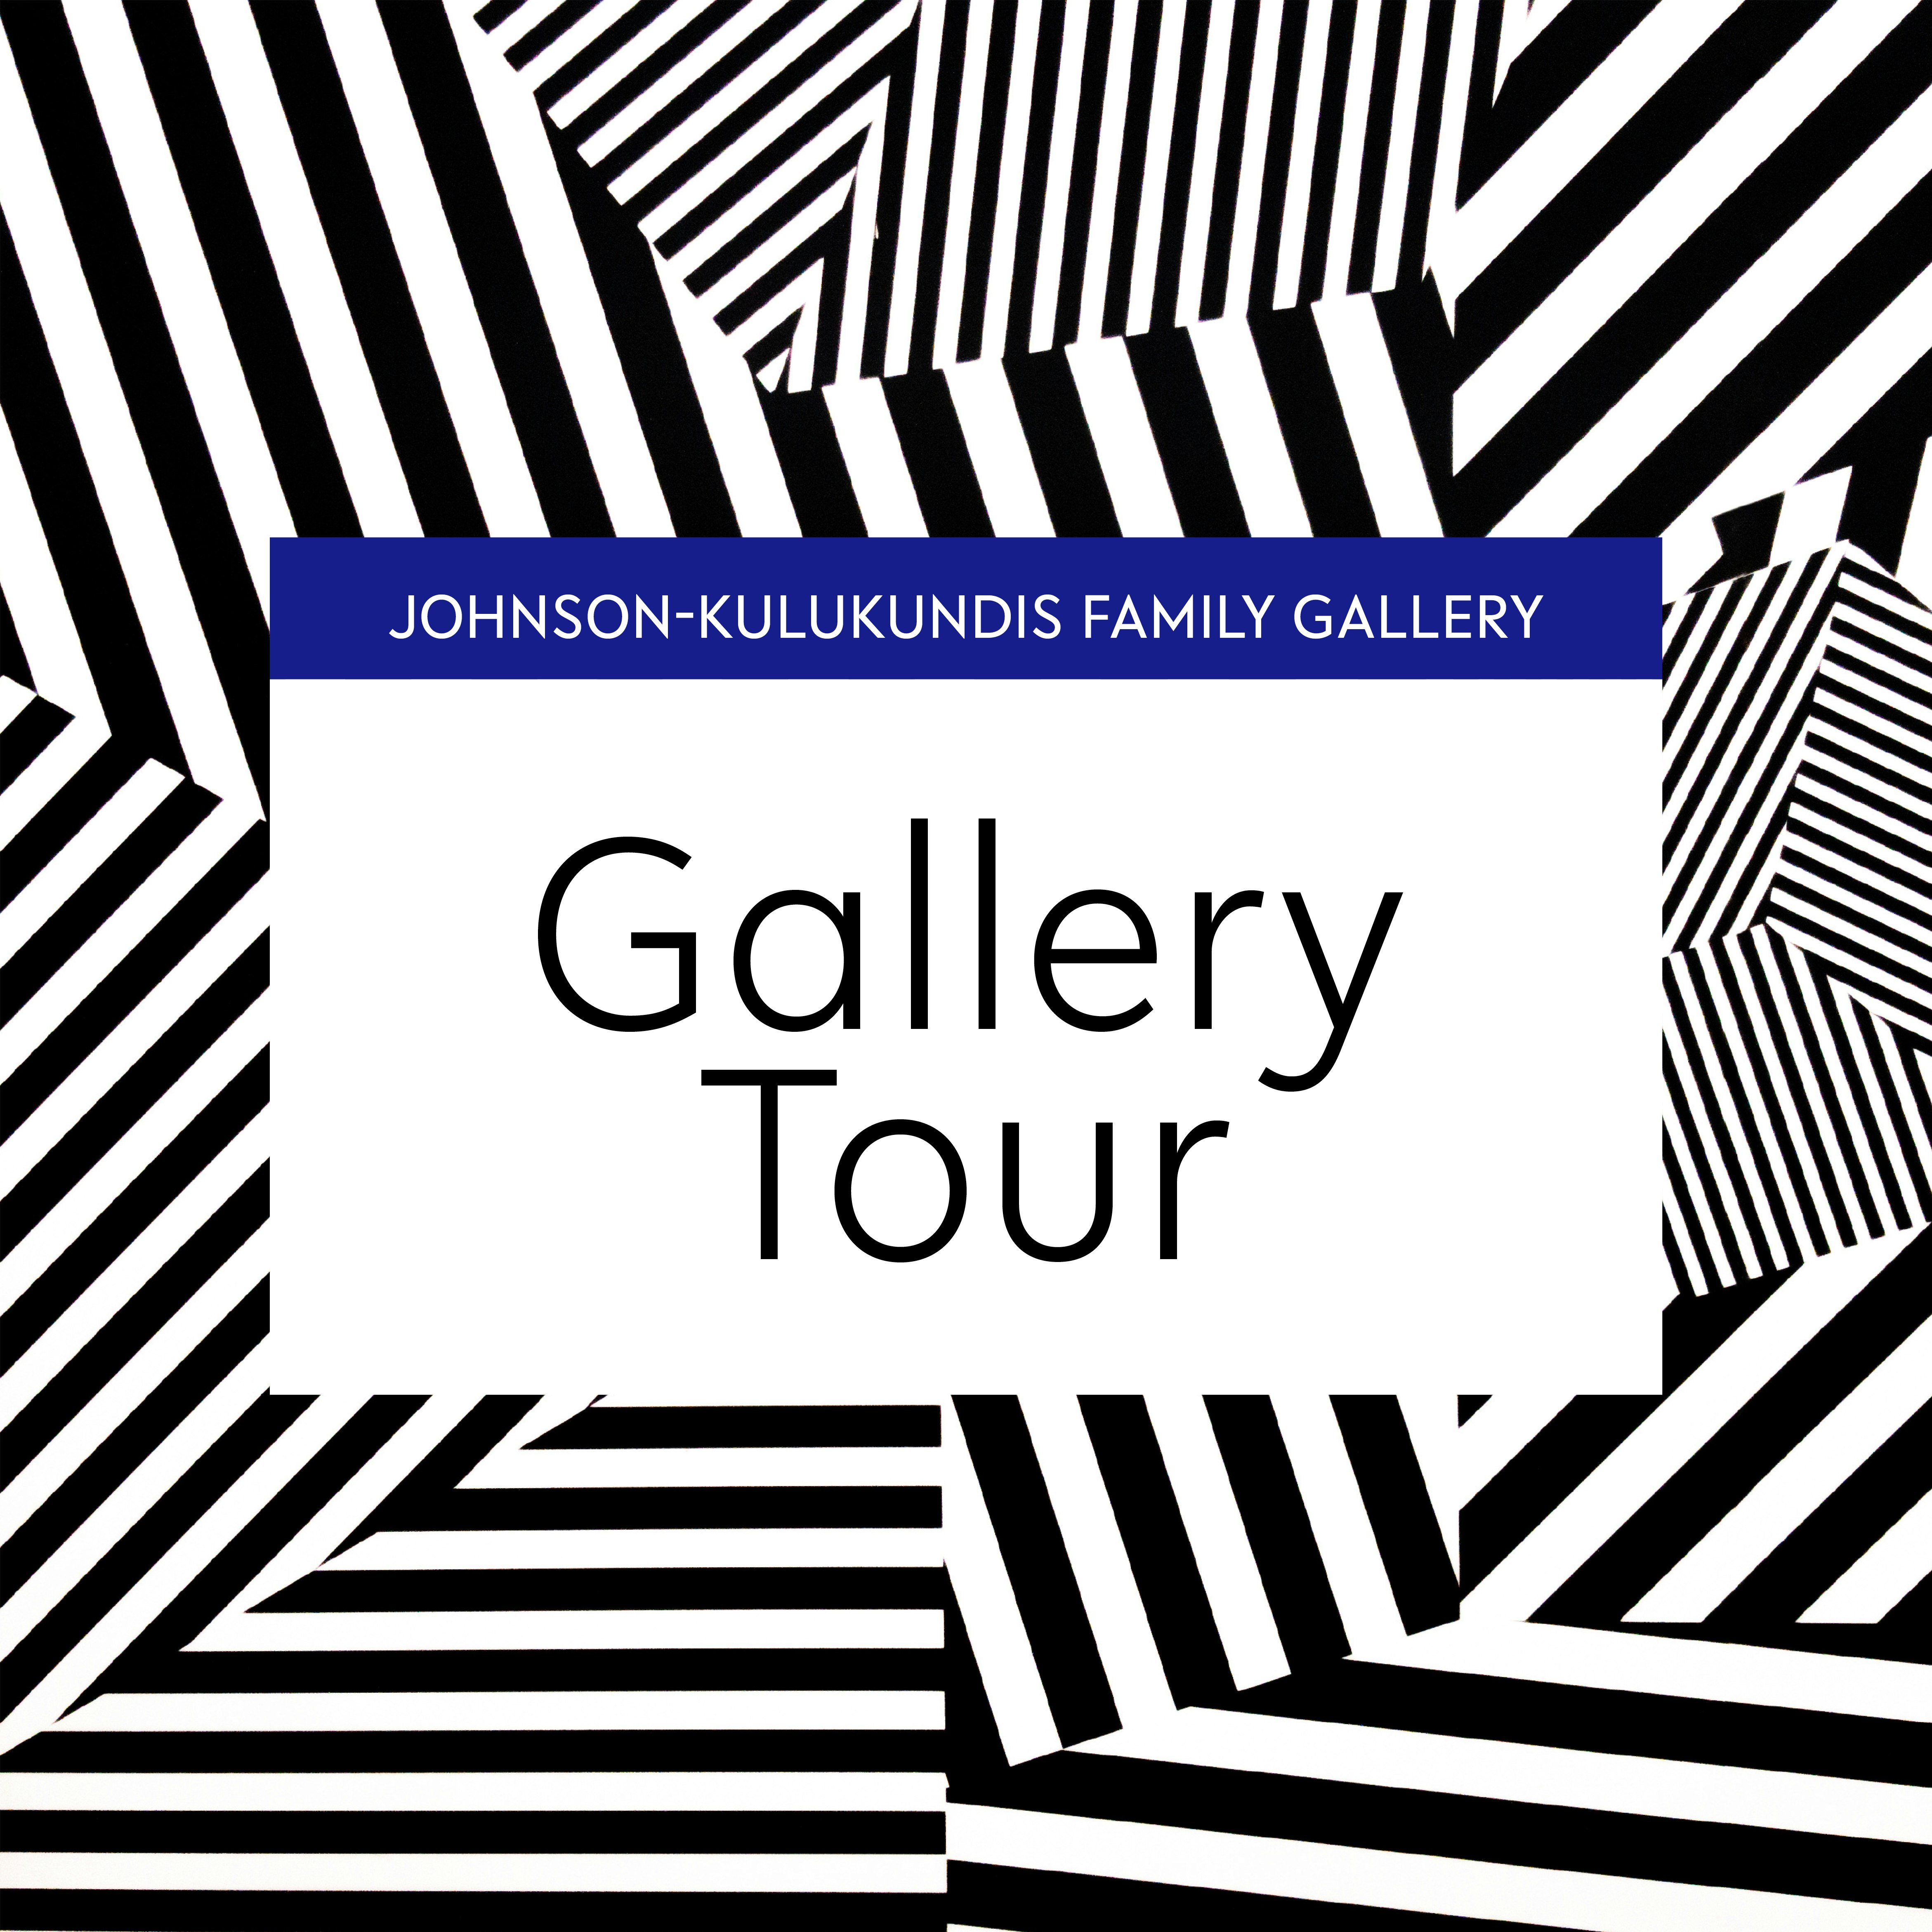 Gallery Tour at Johnson-Kulukundis Family Gallery